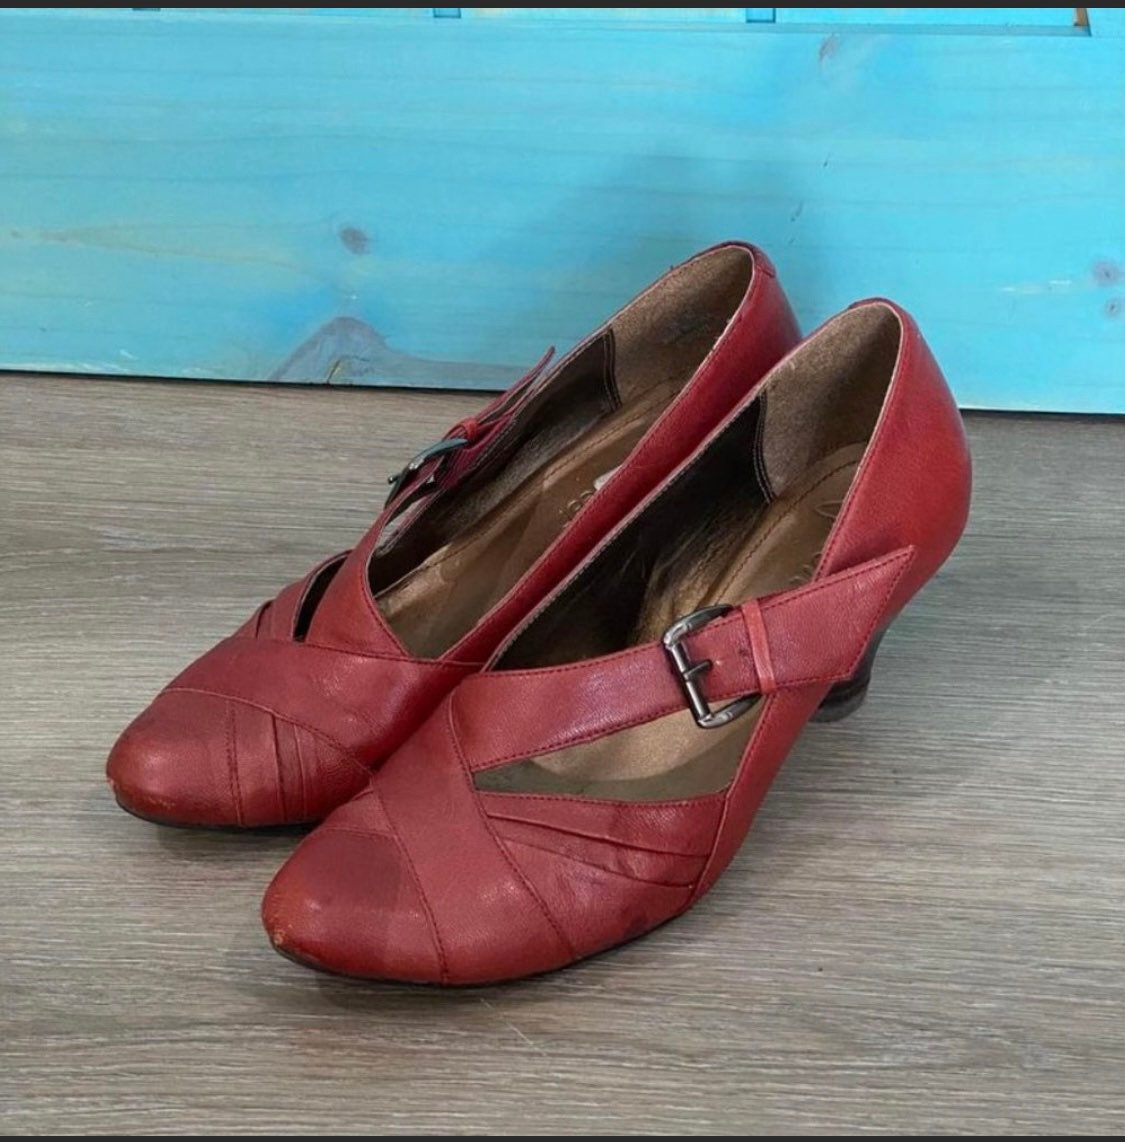 Clarks Softwear Cherry Red Leather Belted Shoes 7/7.5 US or Etsy